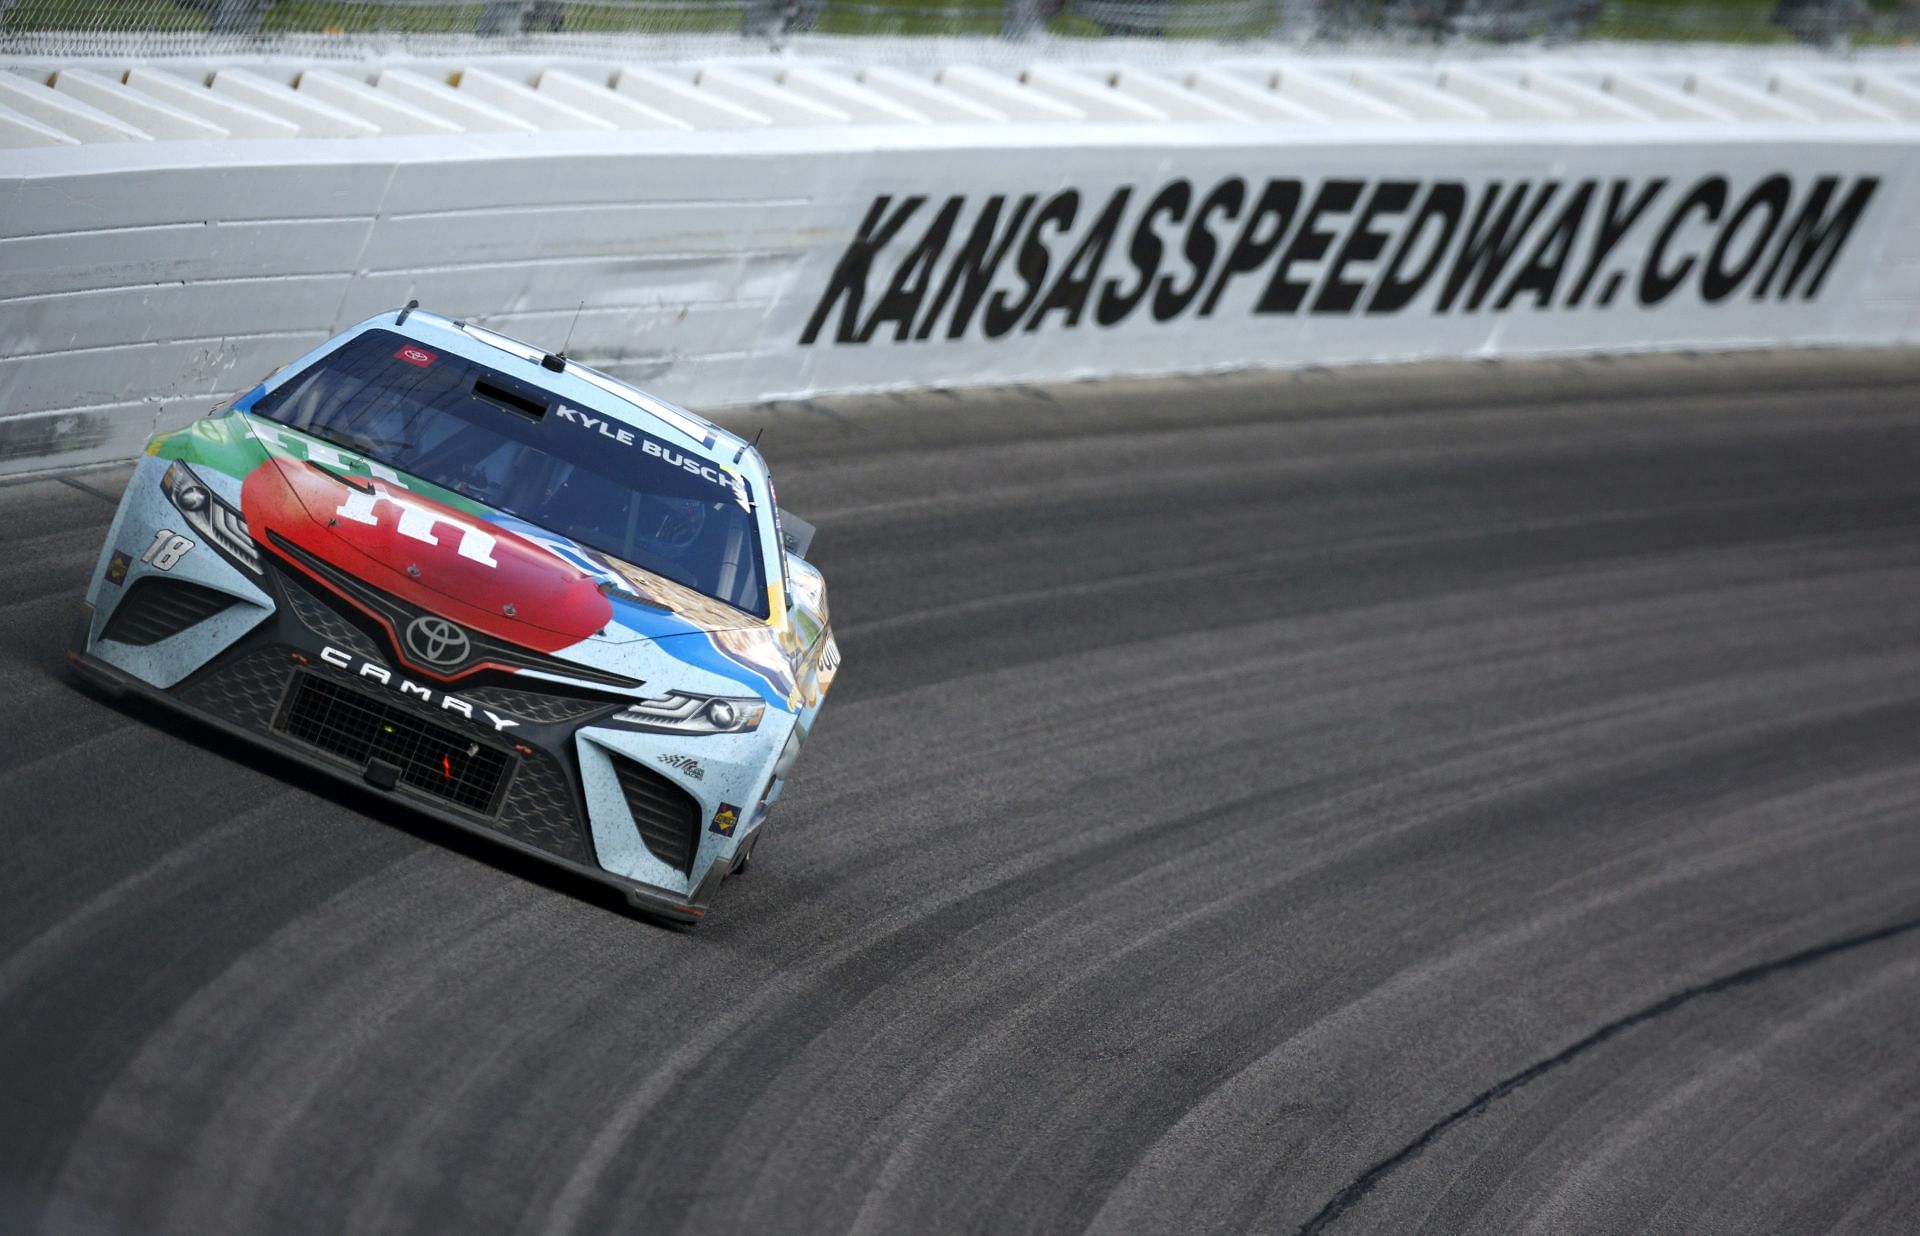 Kyle Busch drives during the 2022 NASCAR Cup Series AdventHealth 400 at Kansas Speedway in Kansas City, Kansas. (Photo by Sean Gardner/Getty Images)